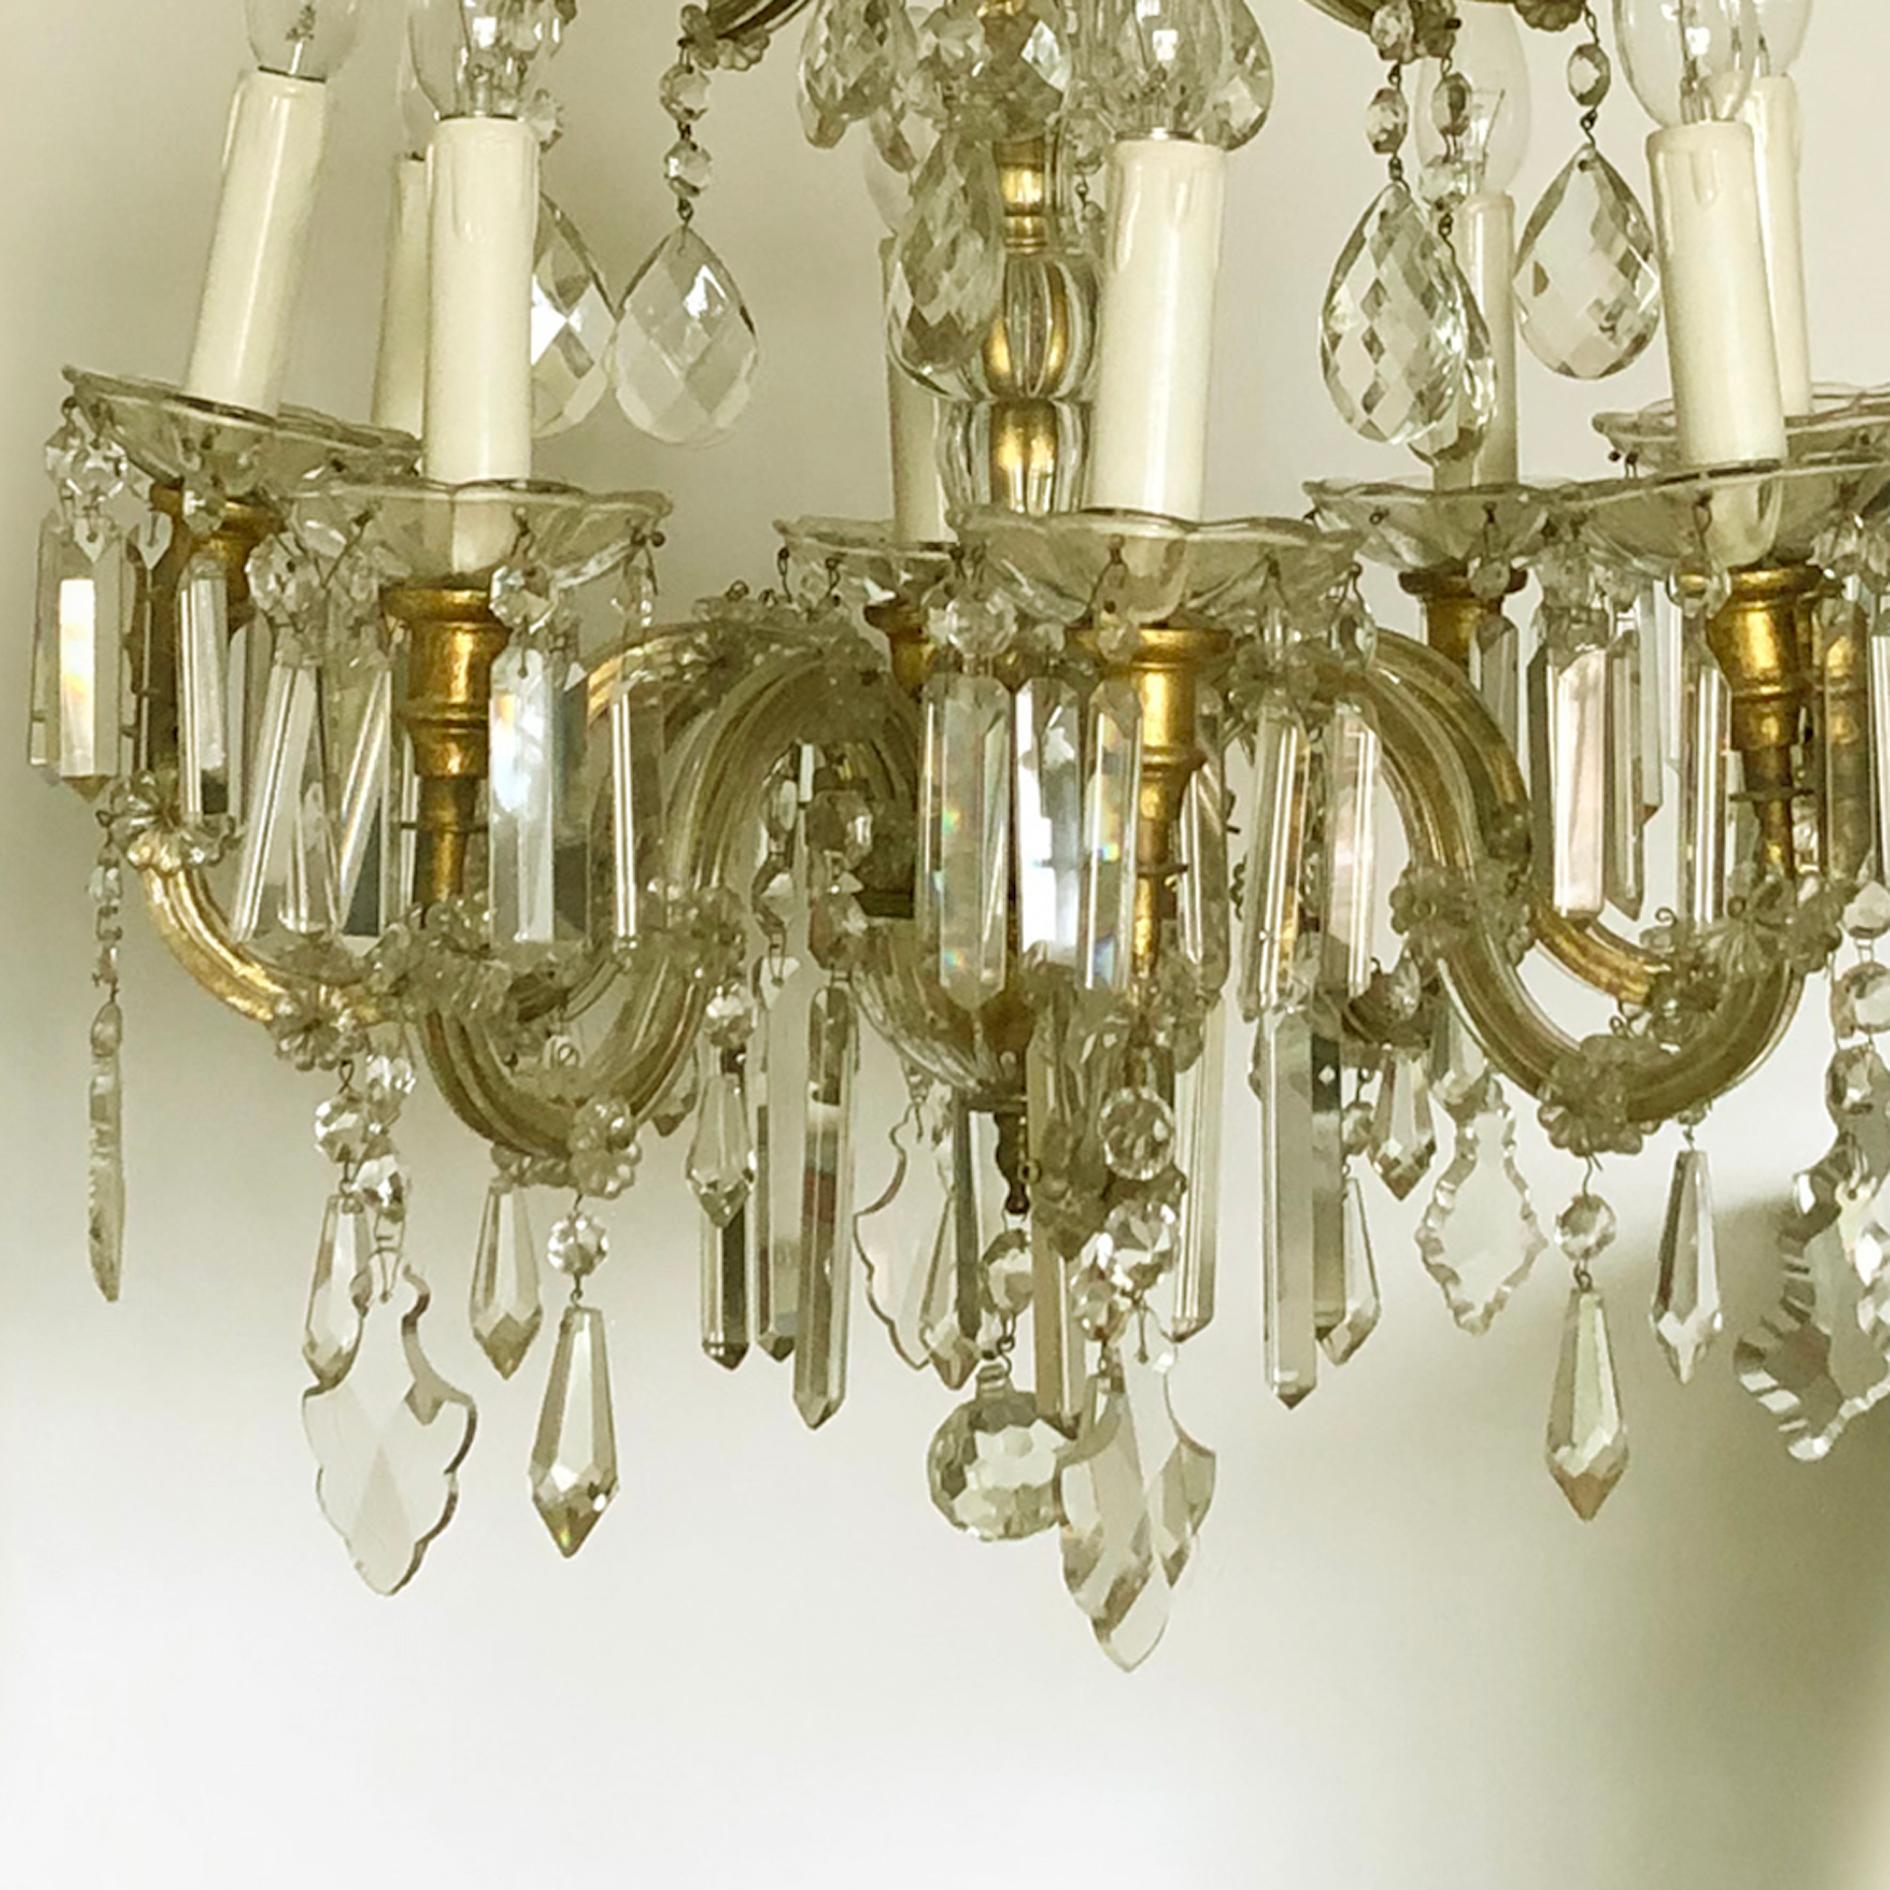 Hungarian Eight Arm Maria Theresa Crystal Chandelier, Hungary or Austria, 1900s For Sale